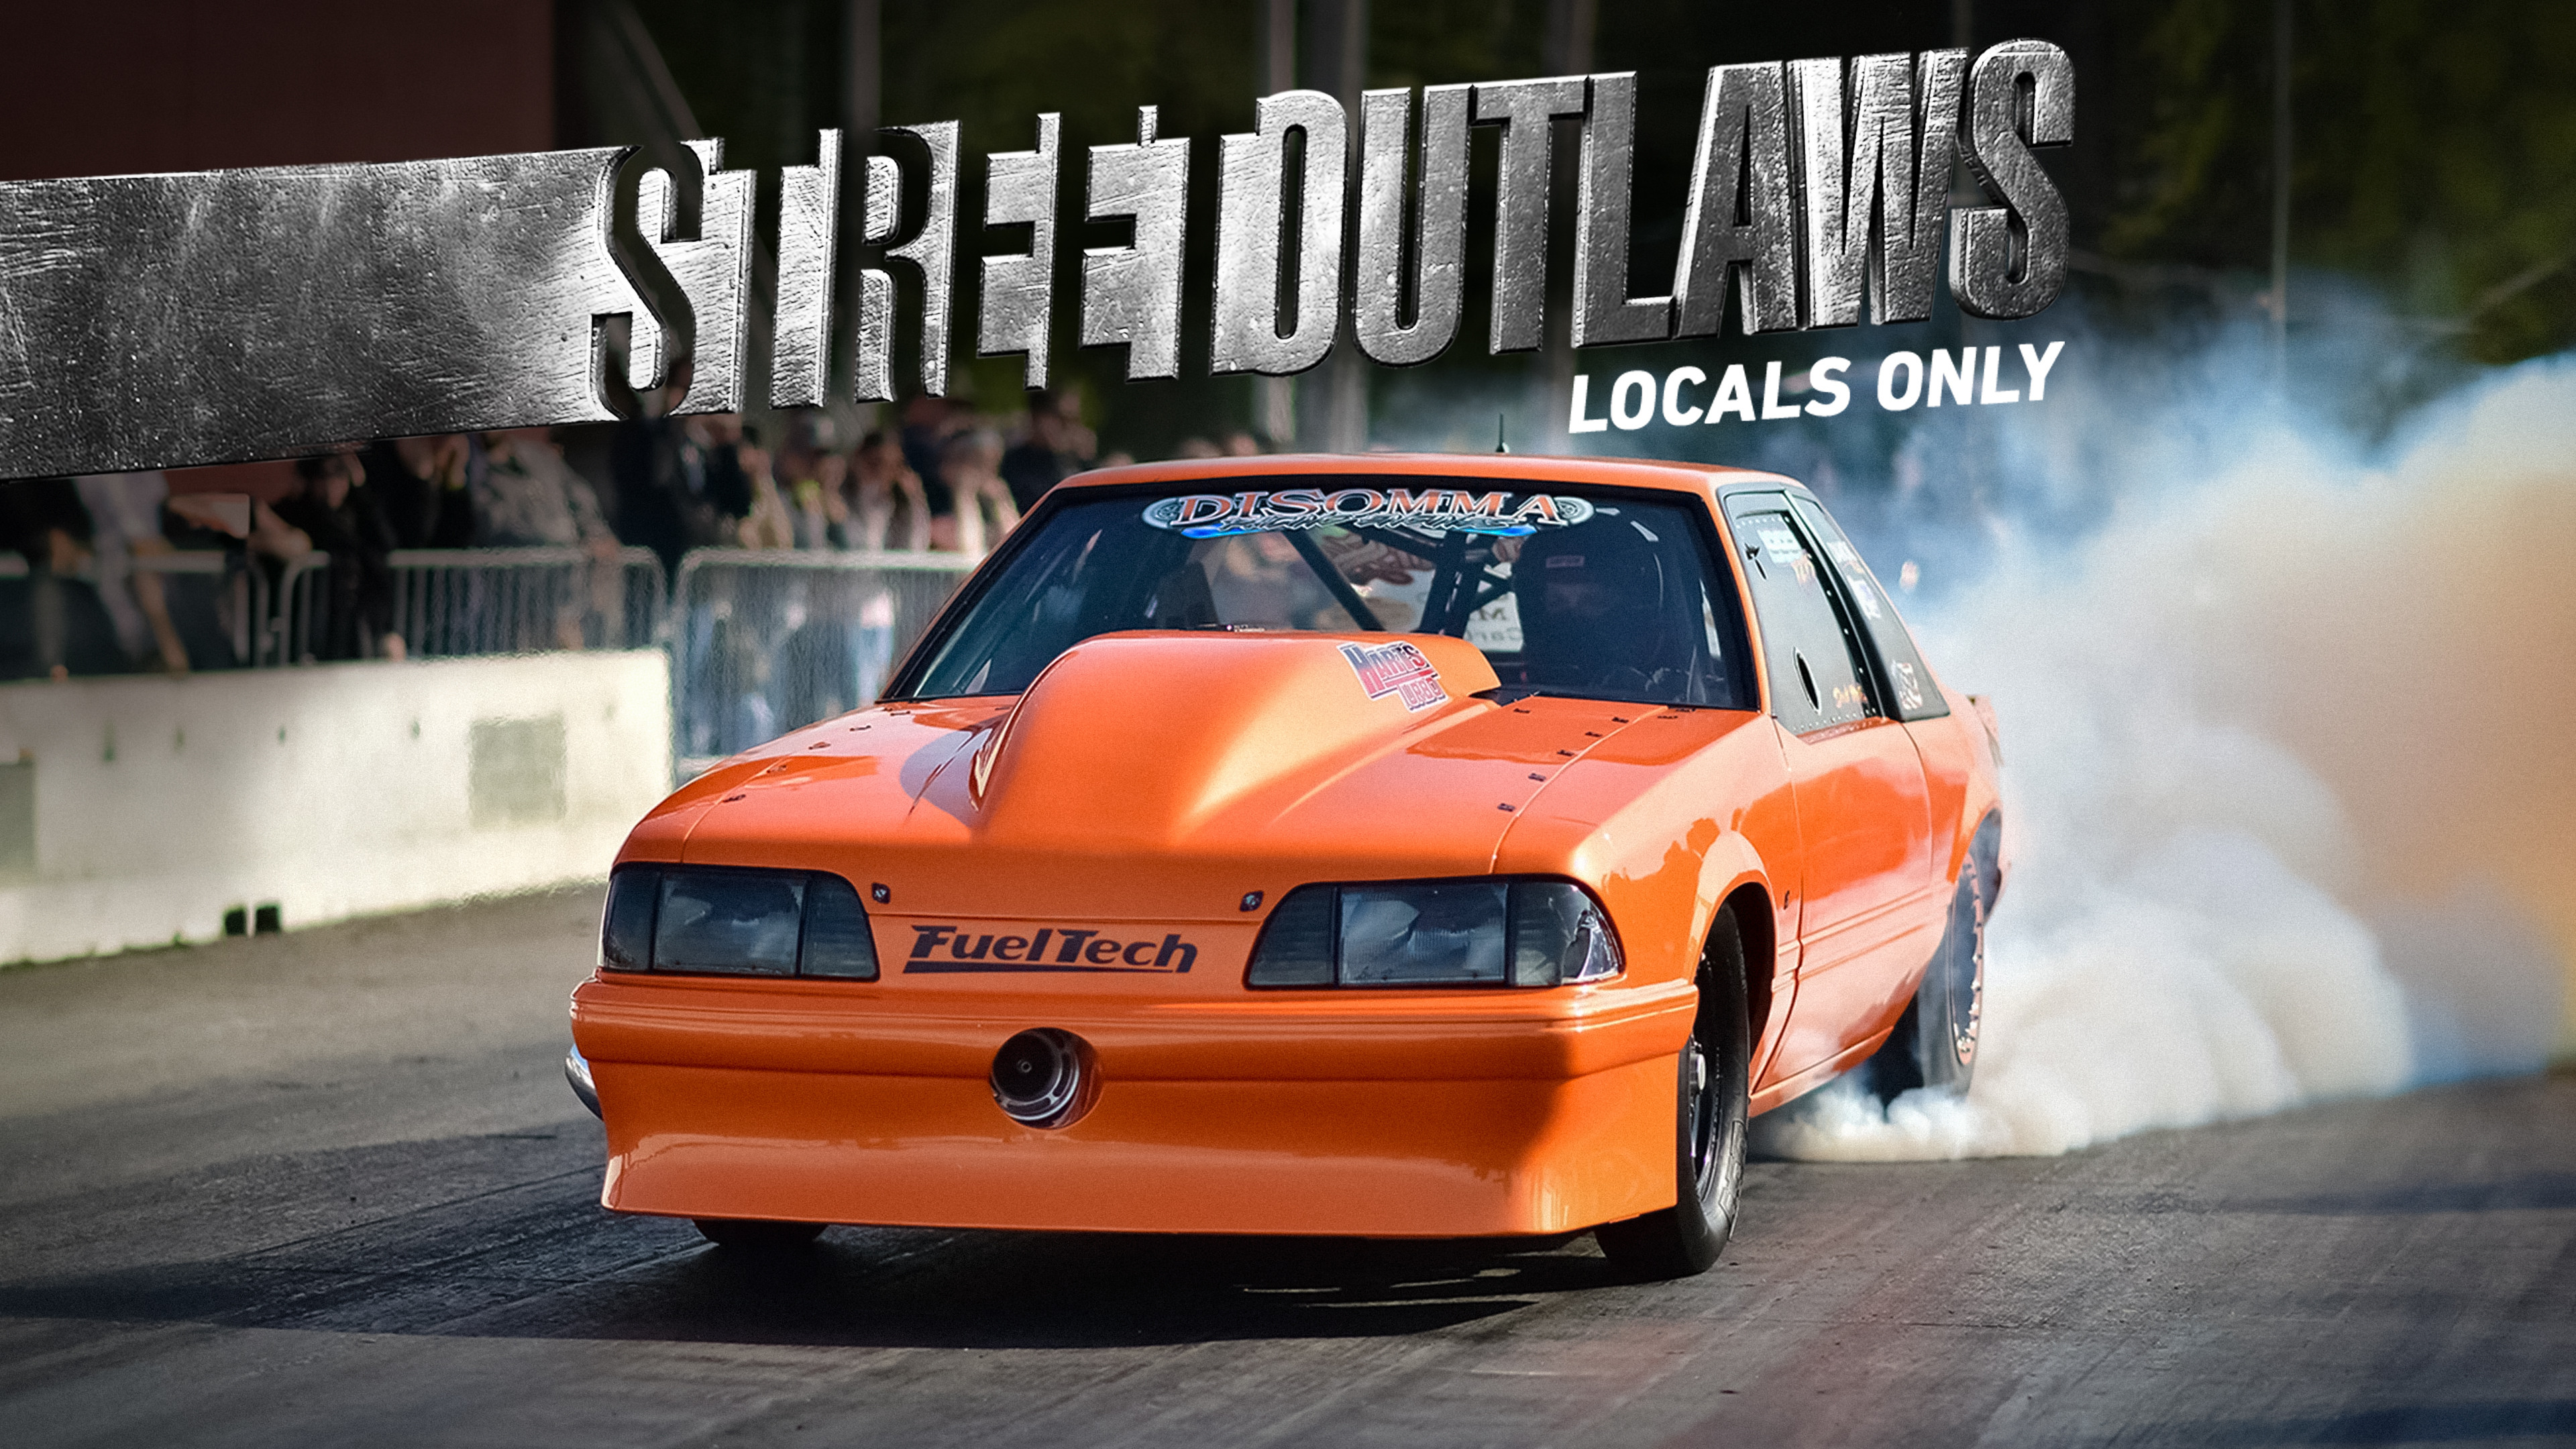 Street Outlaws: Locals Only: Season 1